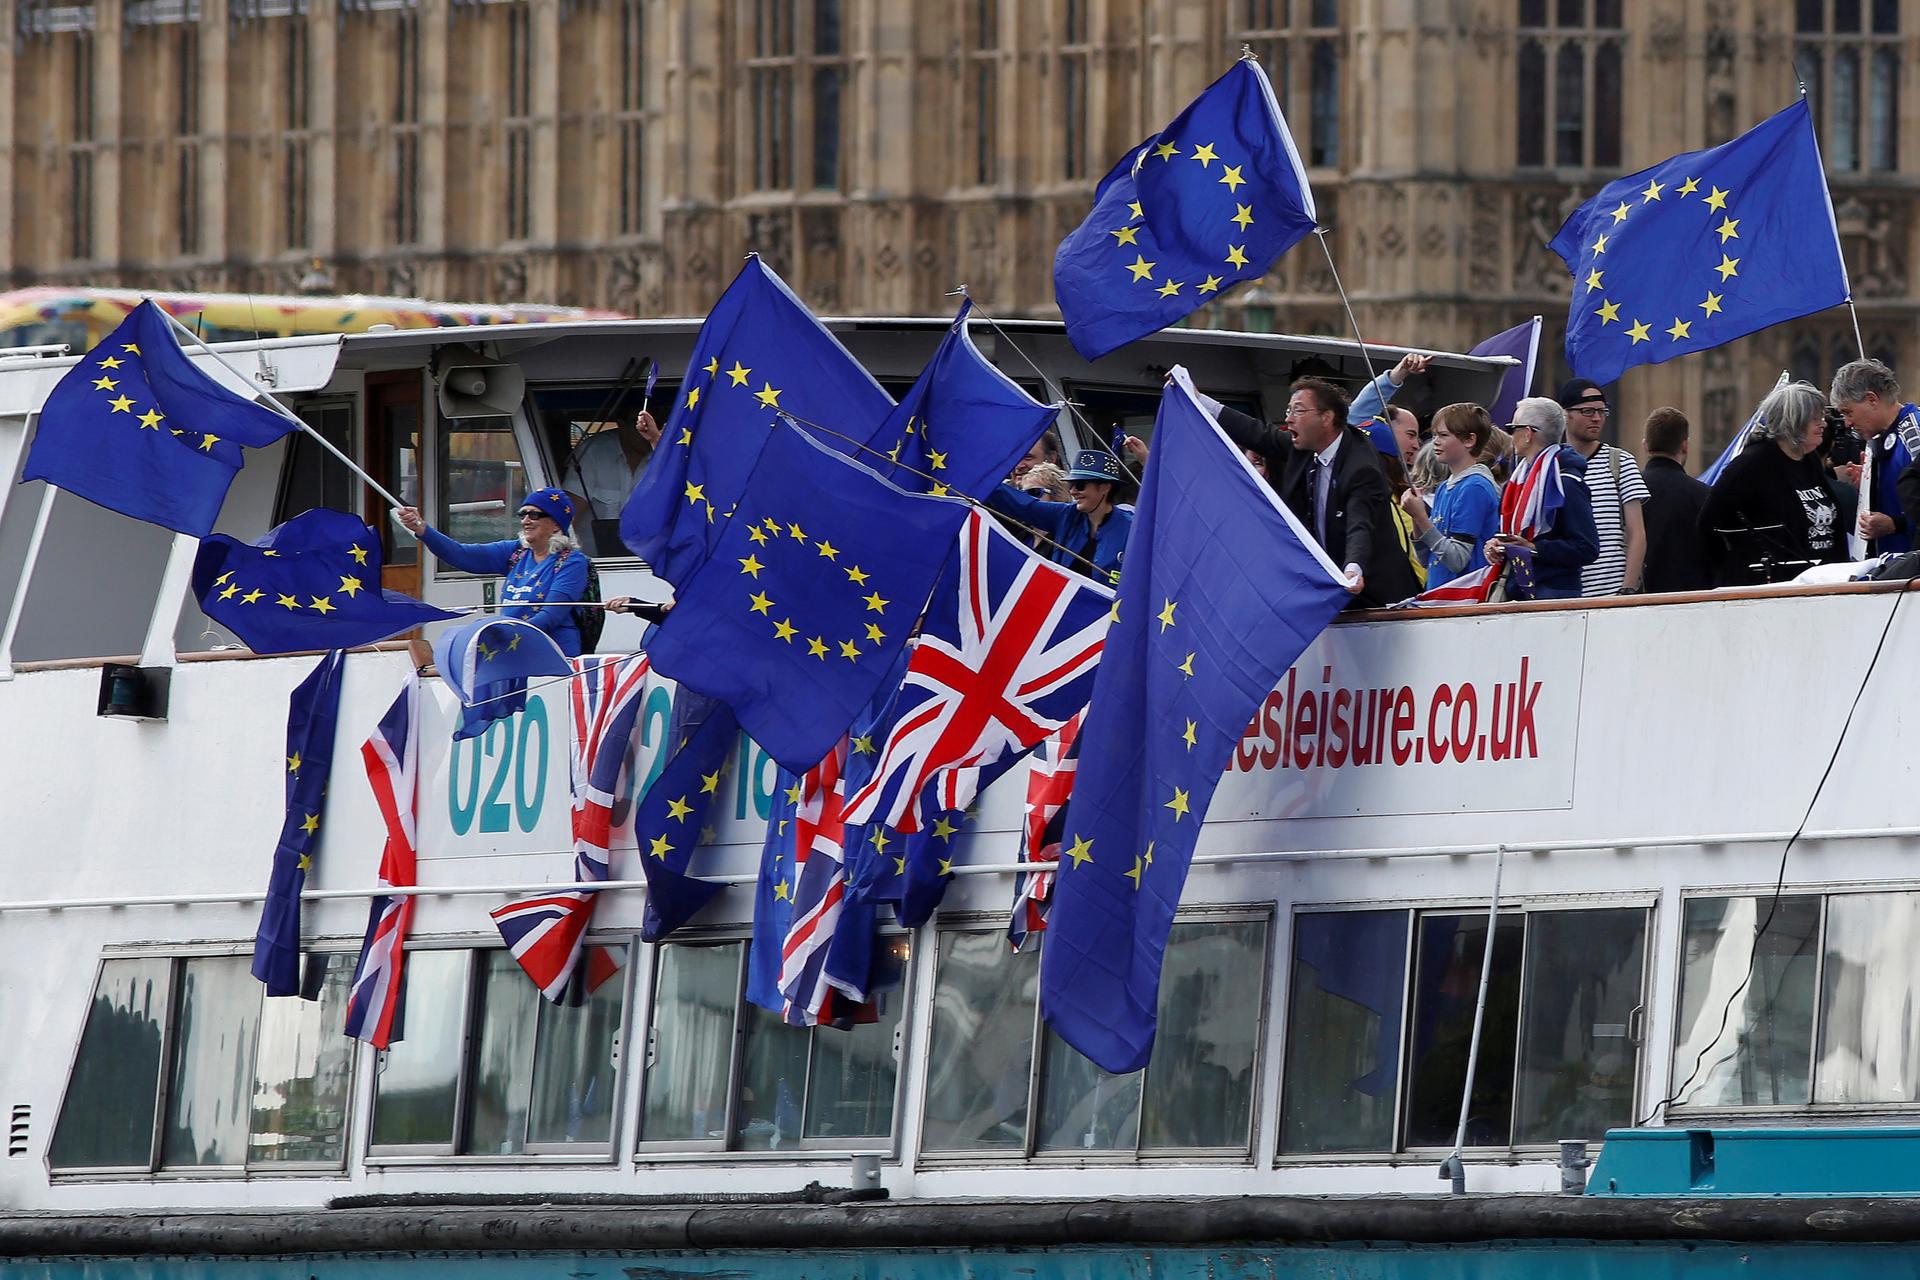 Anti-Brexit, pro-European Union Remain supporters wave flags